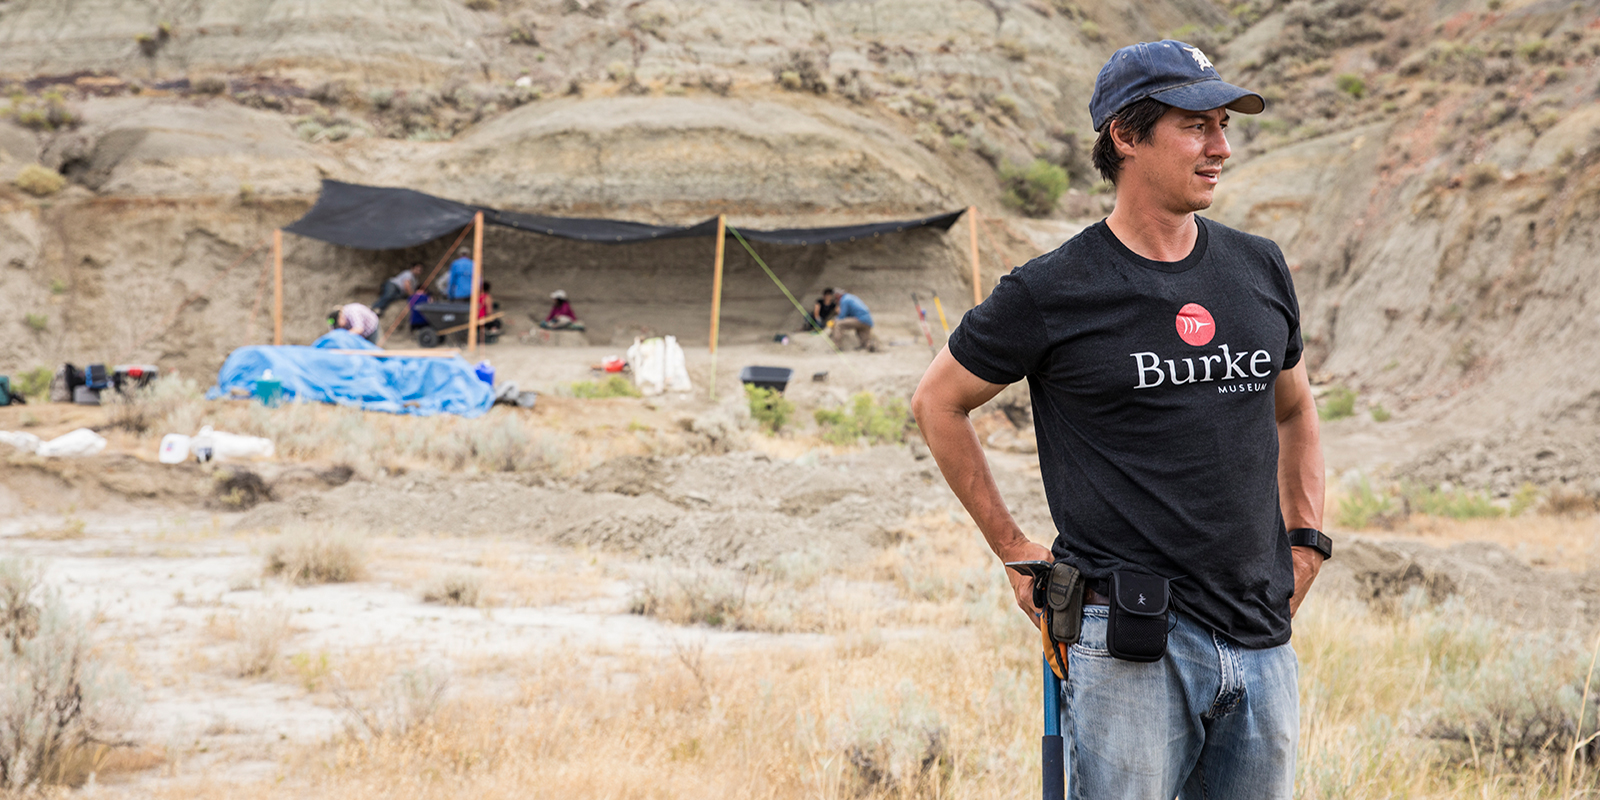 A palentologist with a Burke Museum tee shirt standing in front of a paleontology dig site